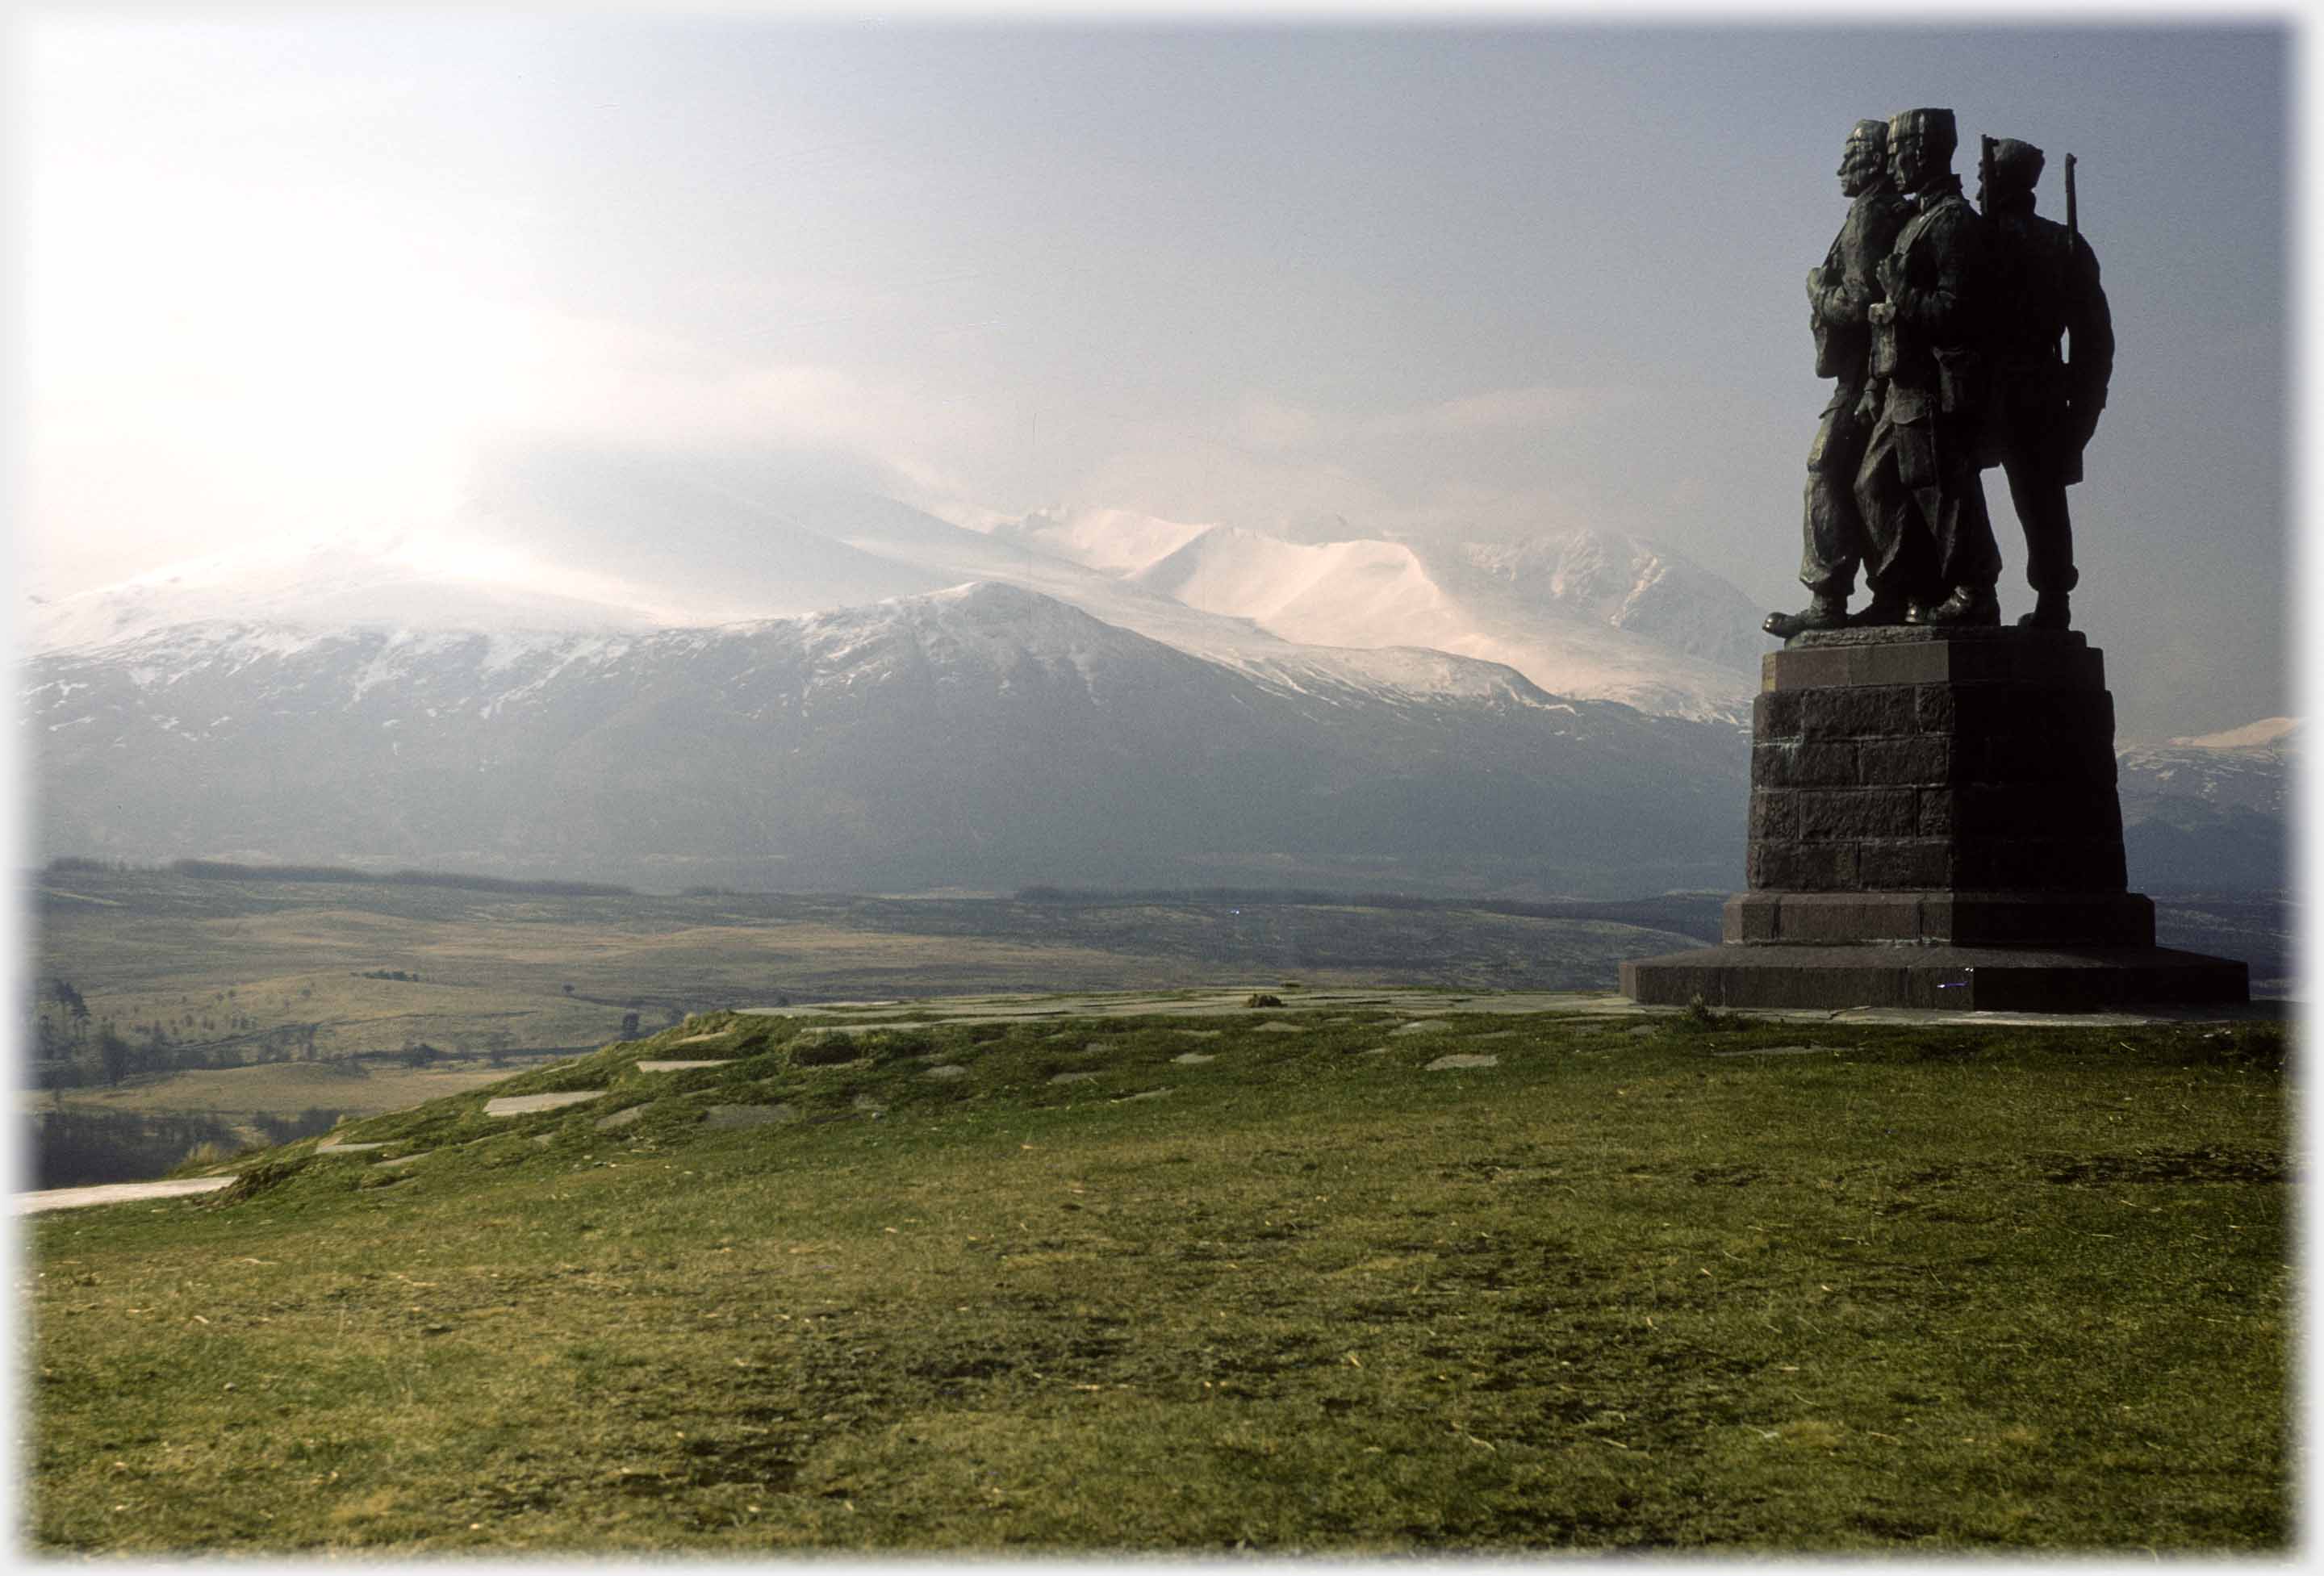 Plinth with three soldiers looking towards snow covered mountains.